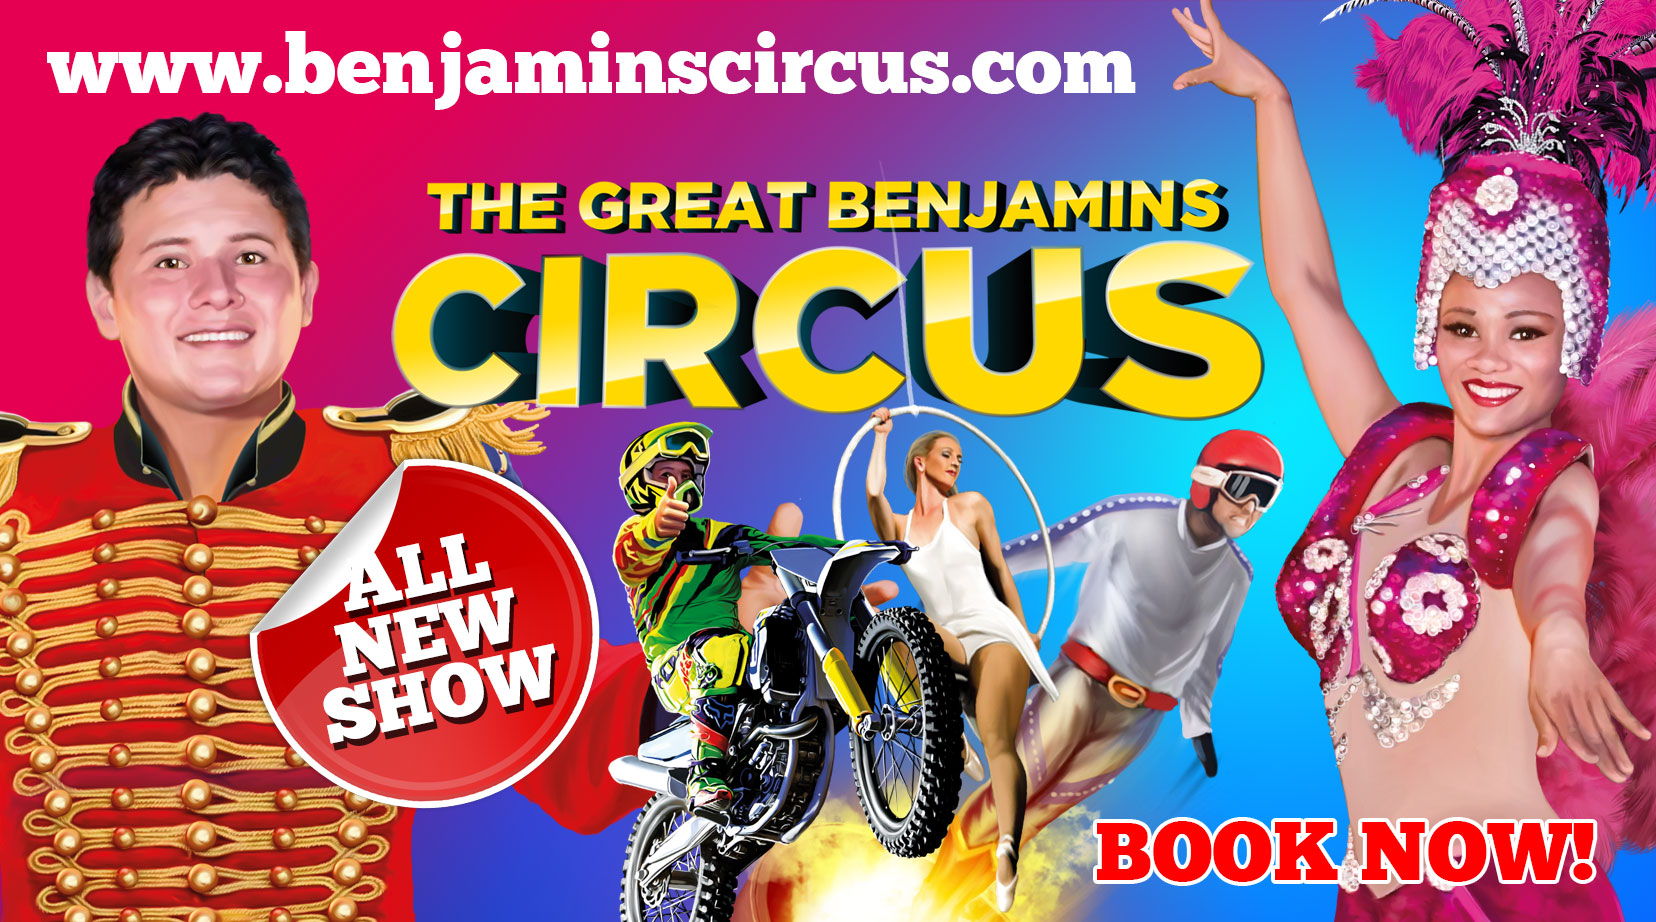 The Great Benjamins Circus is Coming to Belmont And You Could Win Tickets